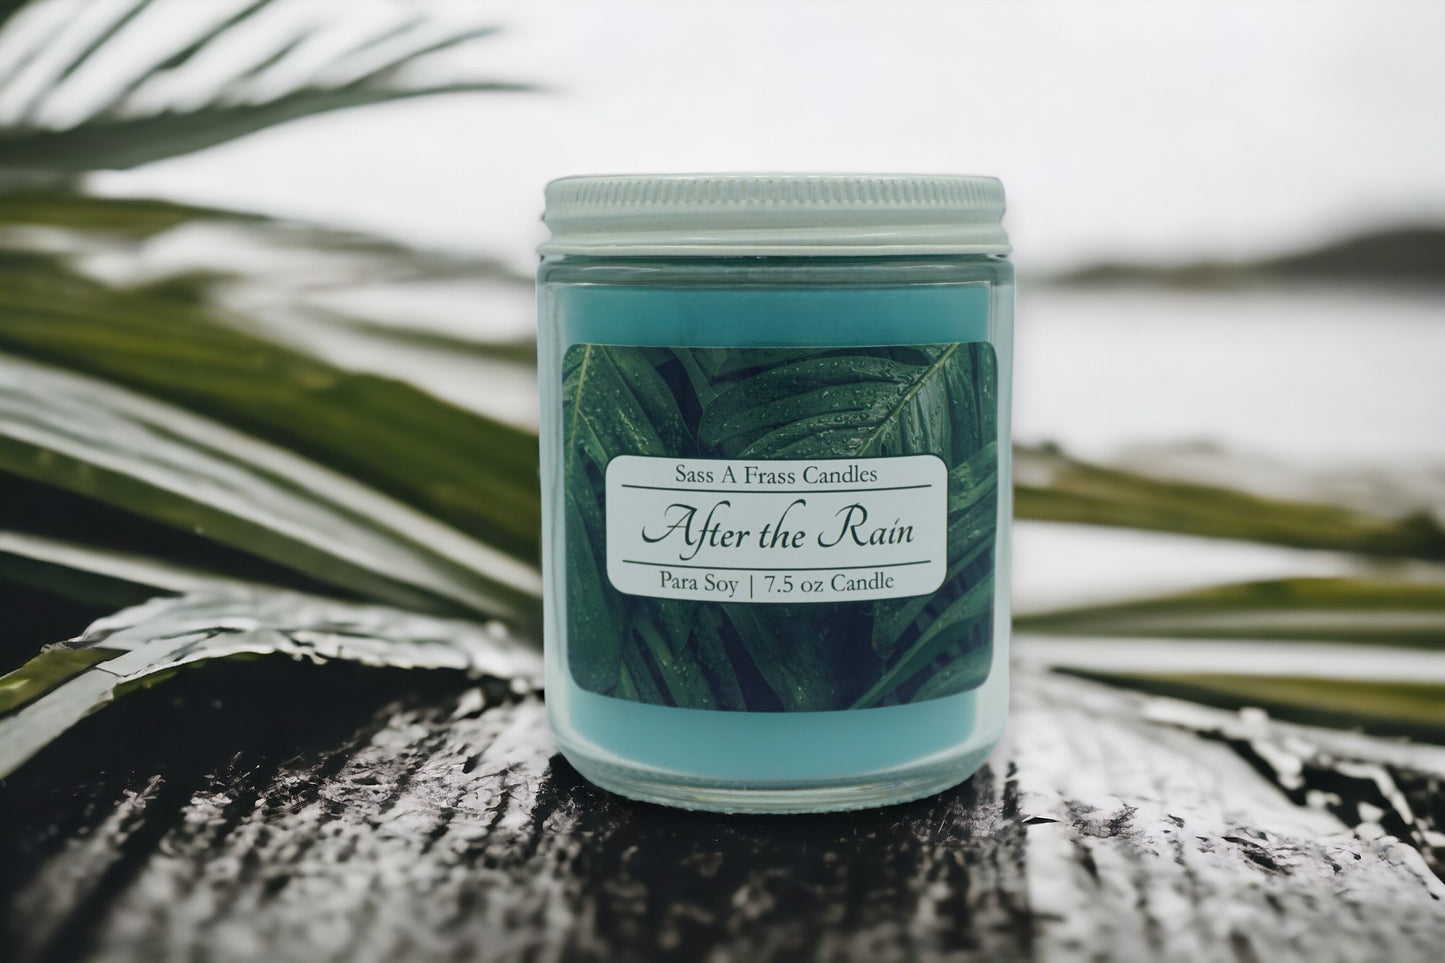 After the Rain 7.5 oz Candle